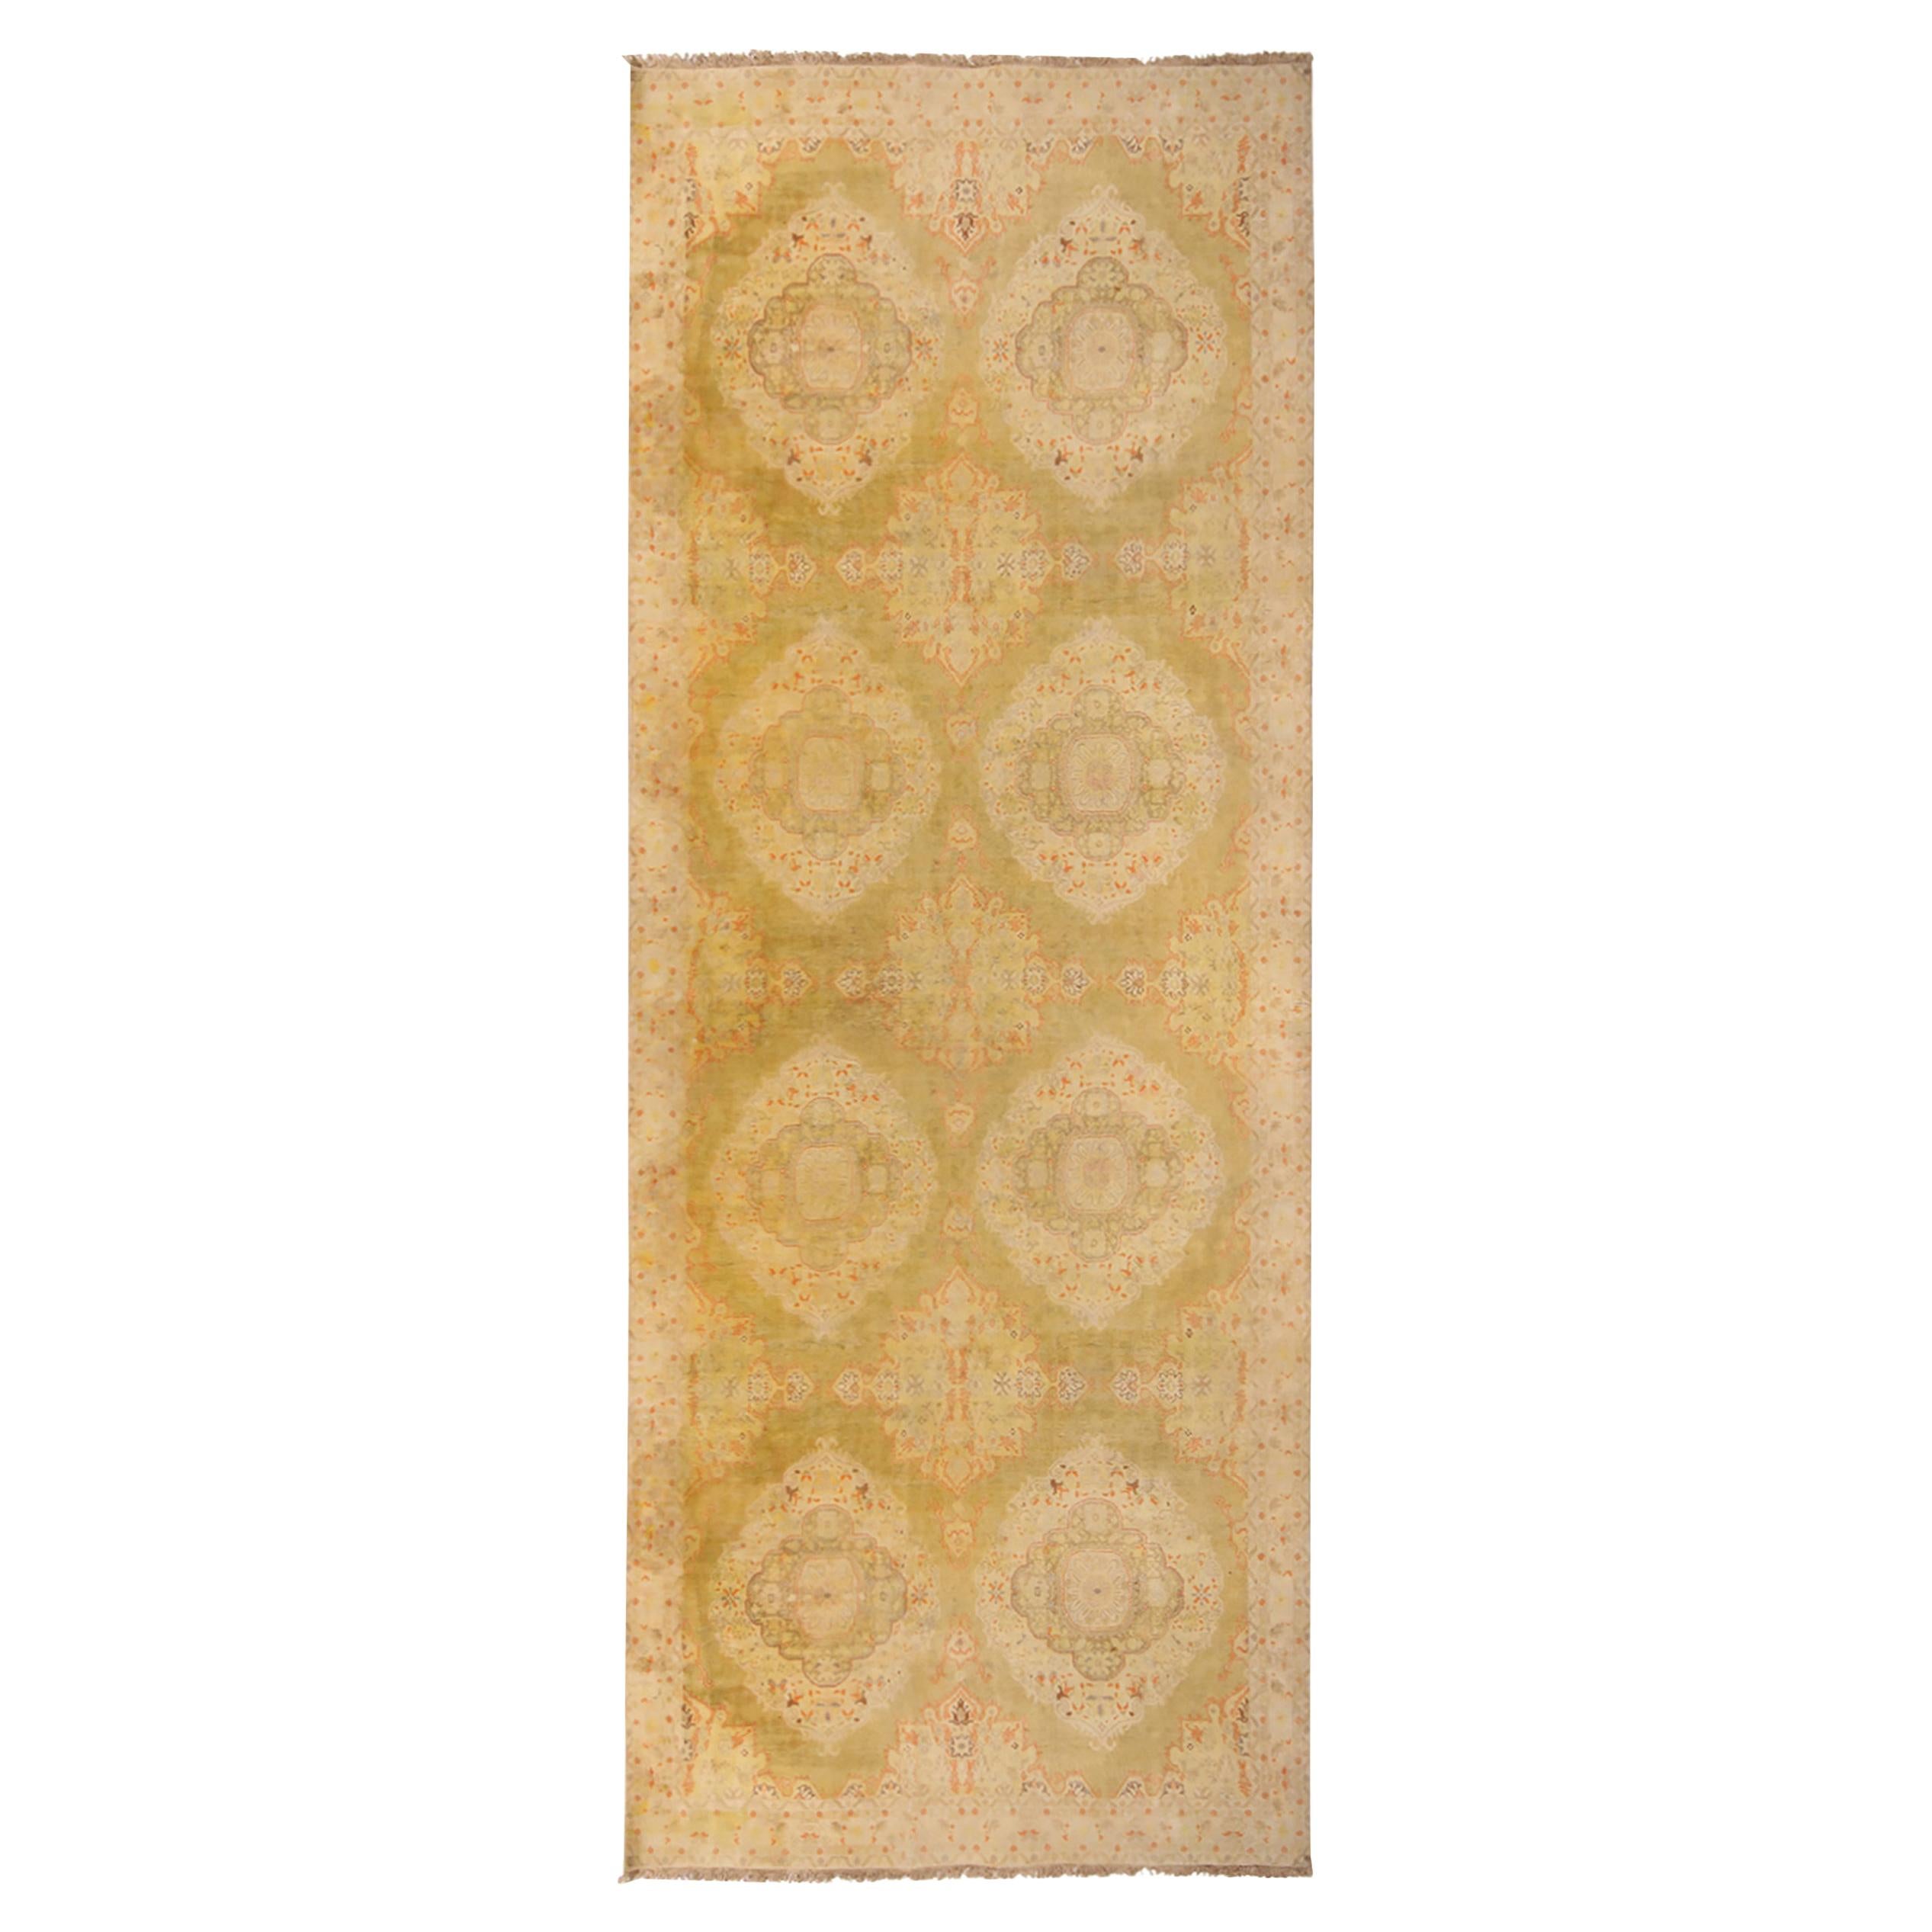 Antique Agra Beige Gold and Red Cotton Rug by Rug & Kilim